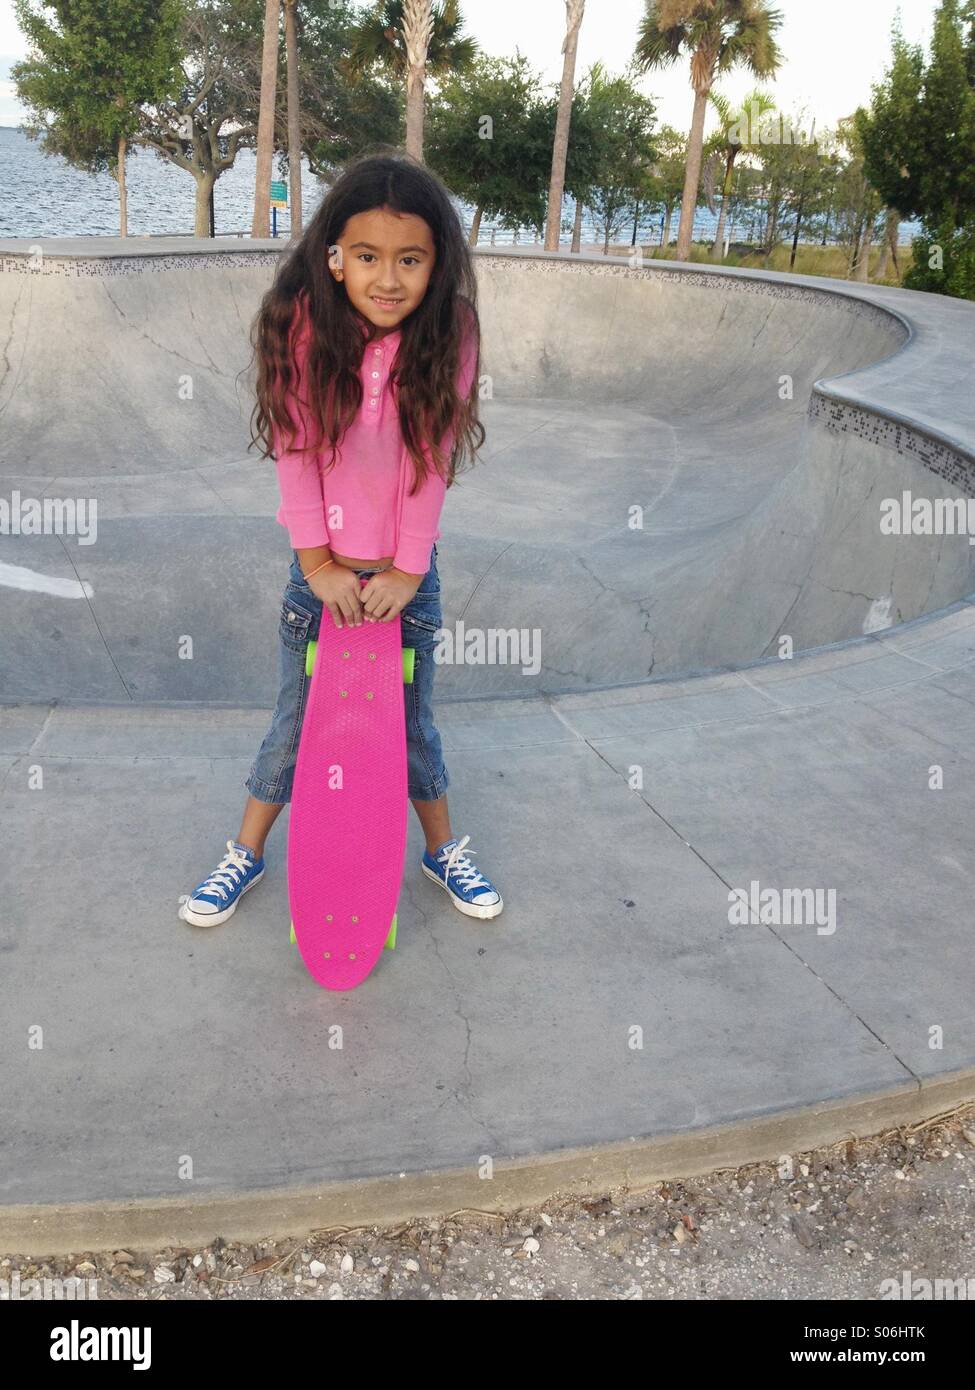 A seven-year-old girl with her pink skateboard at a city park in Florida. Stock Photo